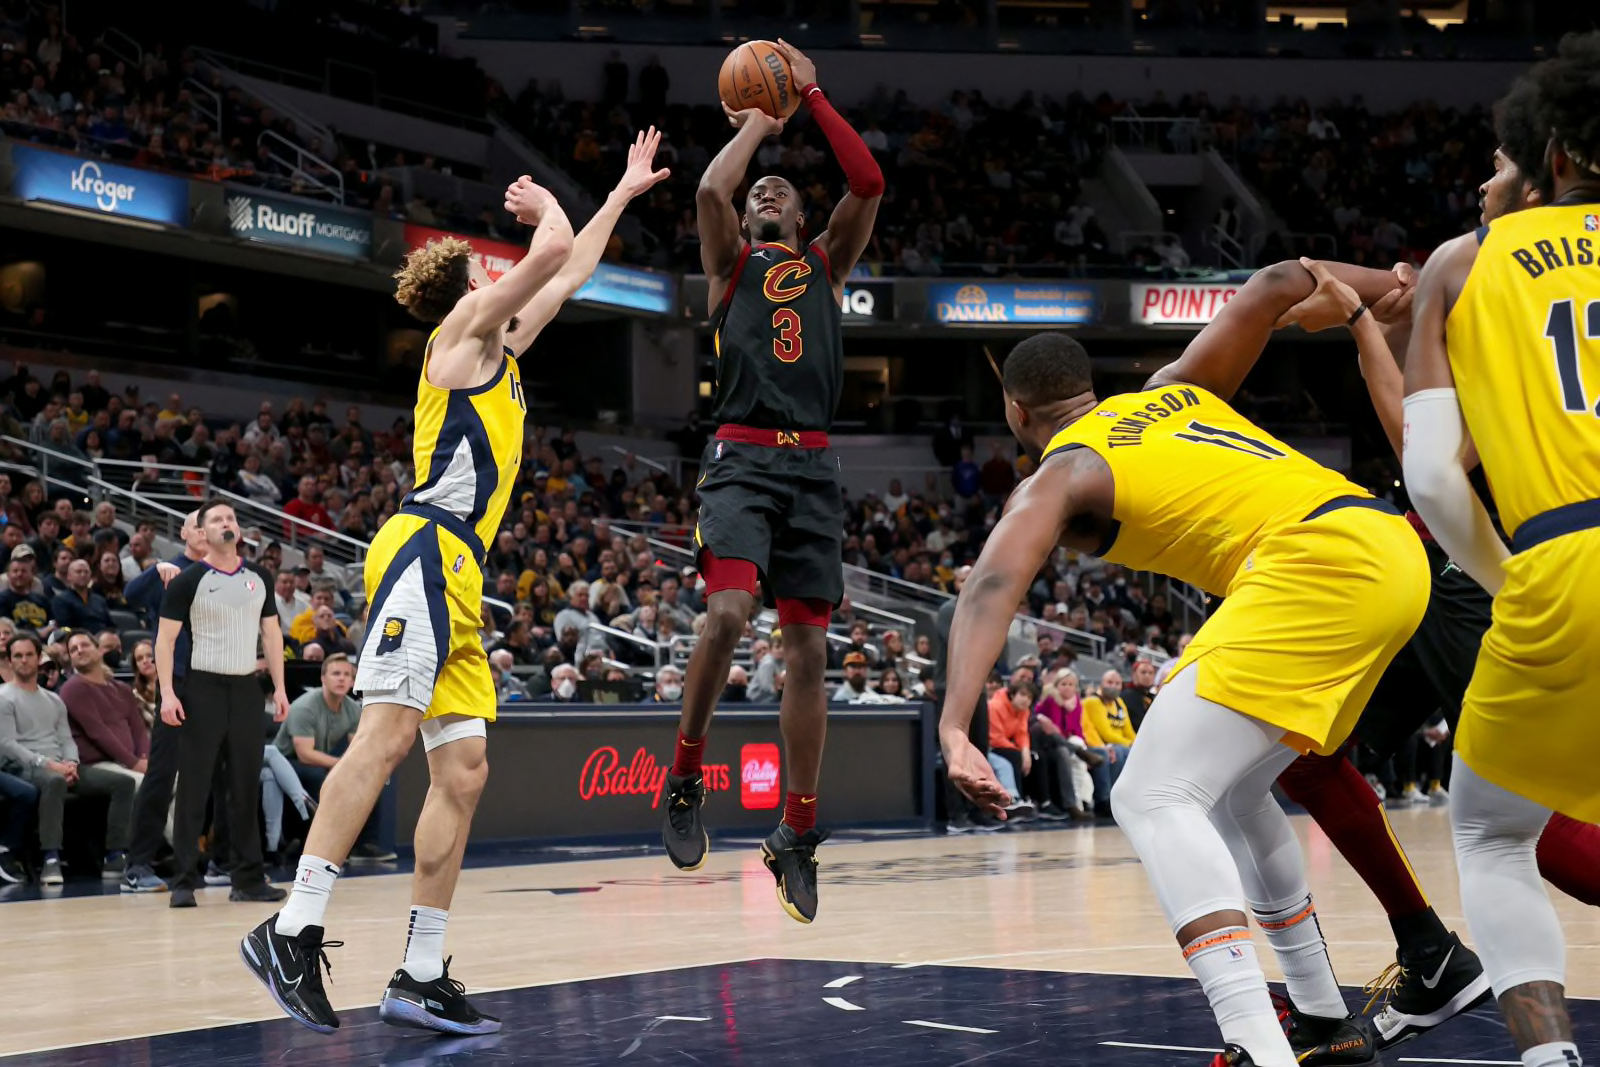 Two early impressions of Caris LeVert's play with the Cavs